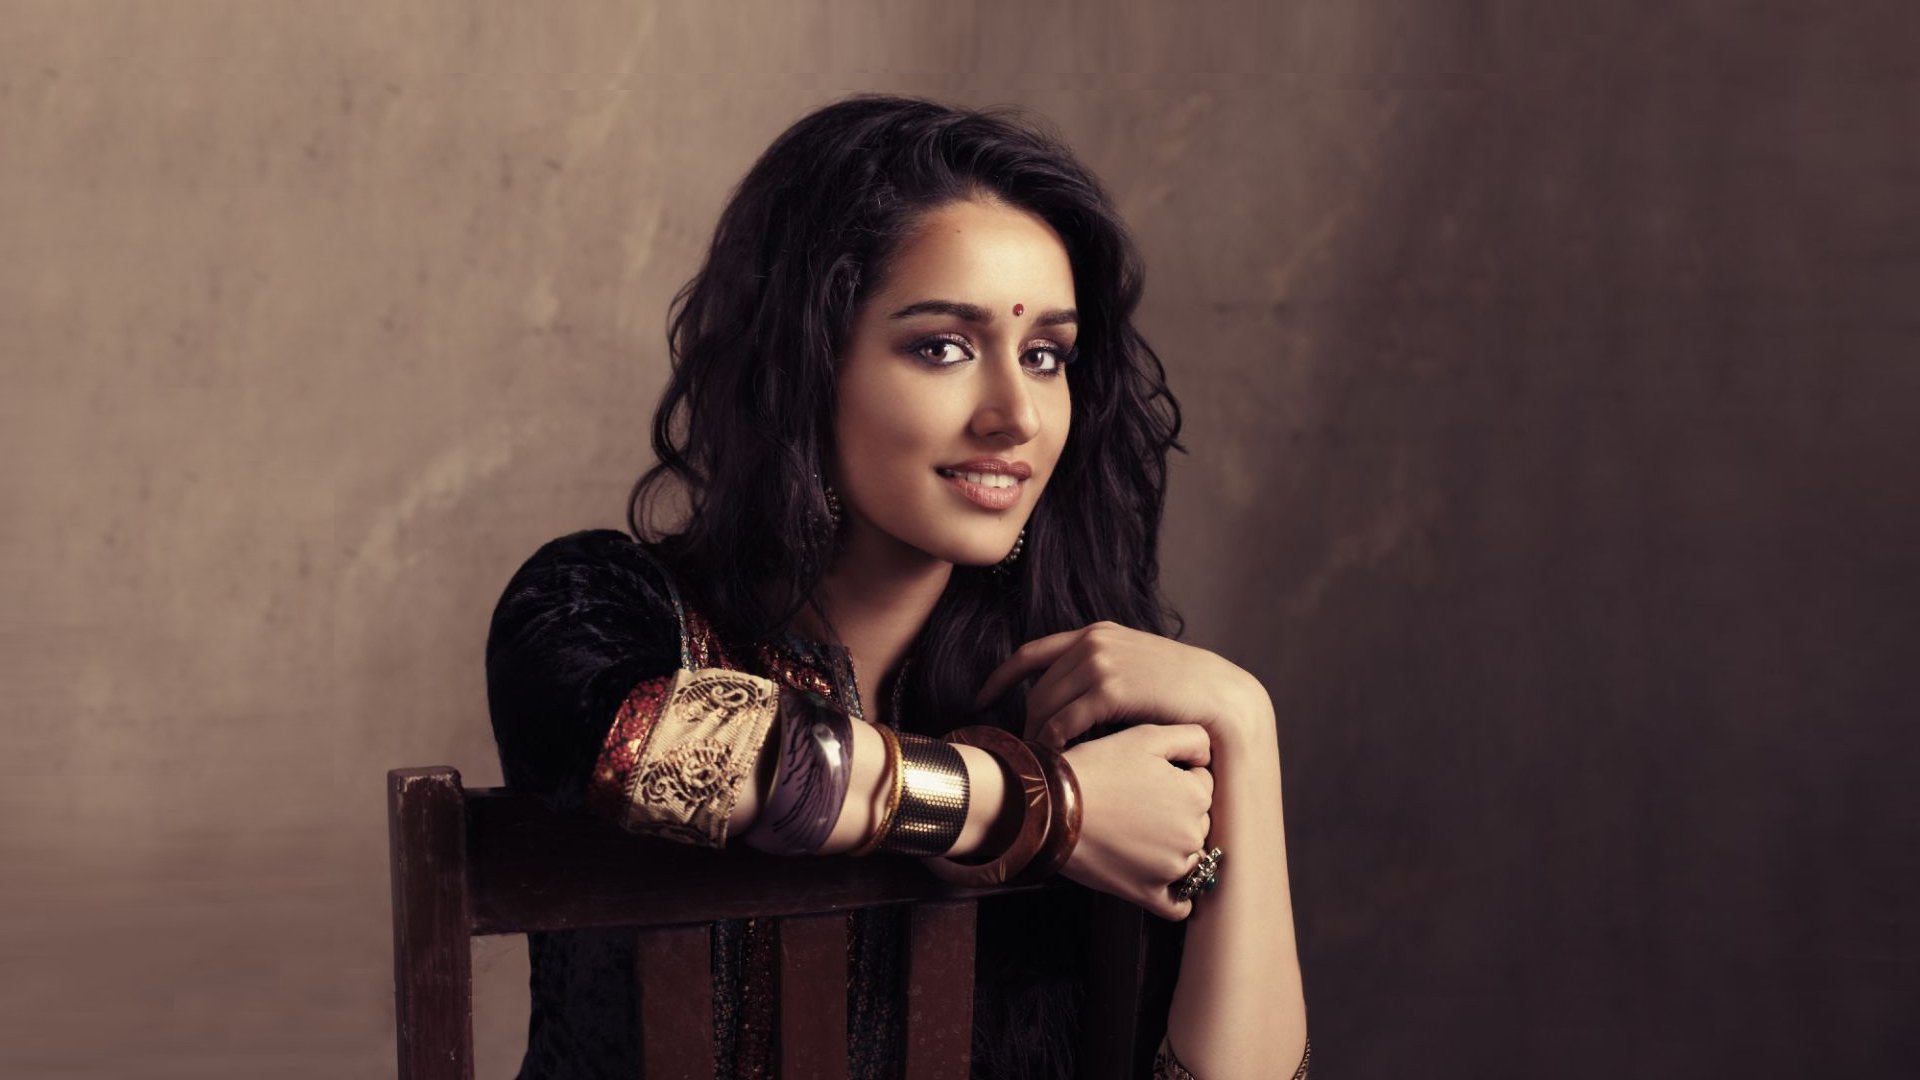 shraddha, Kapoor, Bollywood, Actress, Model, Girl, Beautiful, Brunette,  Pretty, Cute, Beauty, Sexy, Hot, Pose, Face, Eyes, Hair, Lips, Smile,  Figure, India Wallpapers HD / Desktop and Mobile Backgrounds